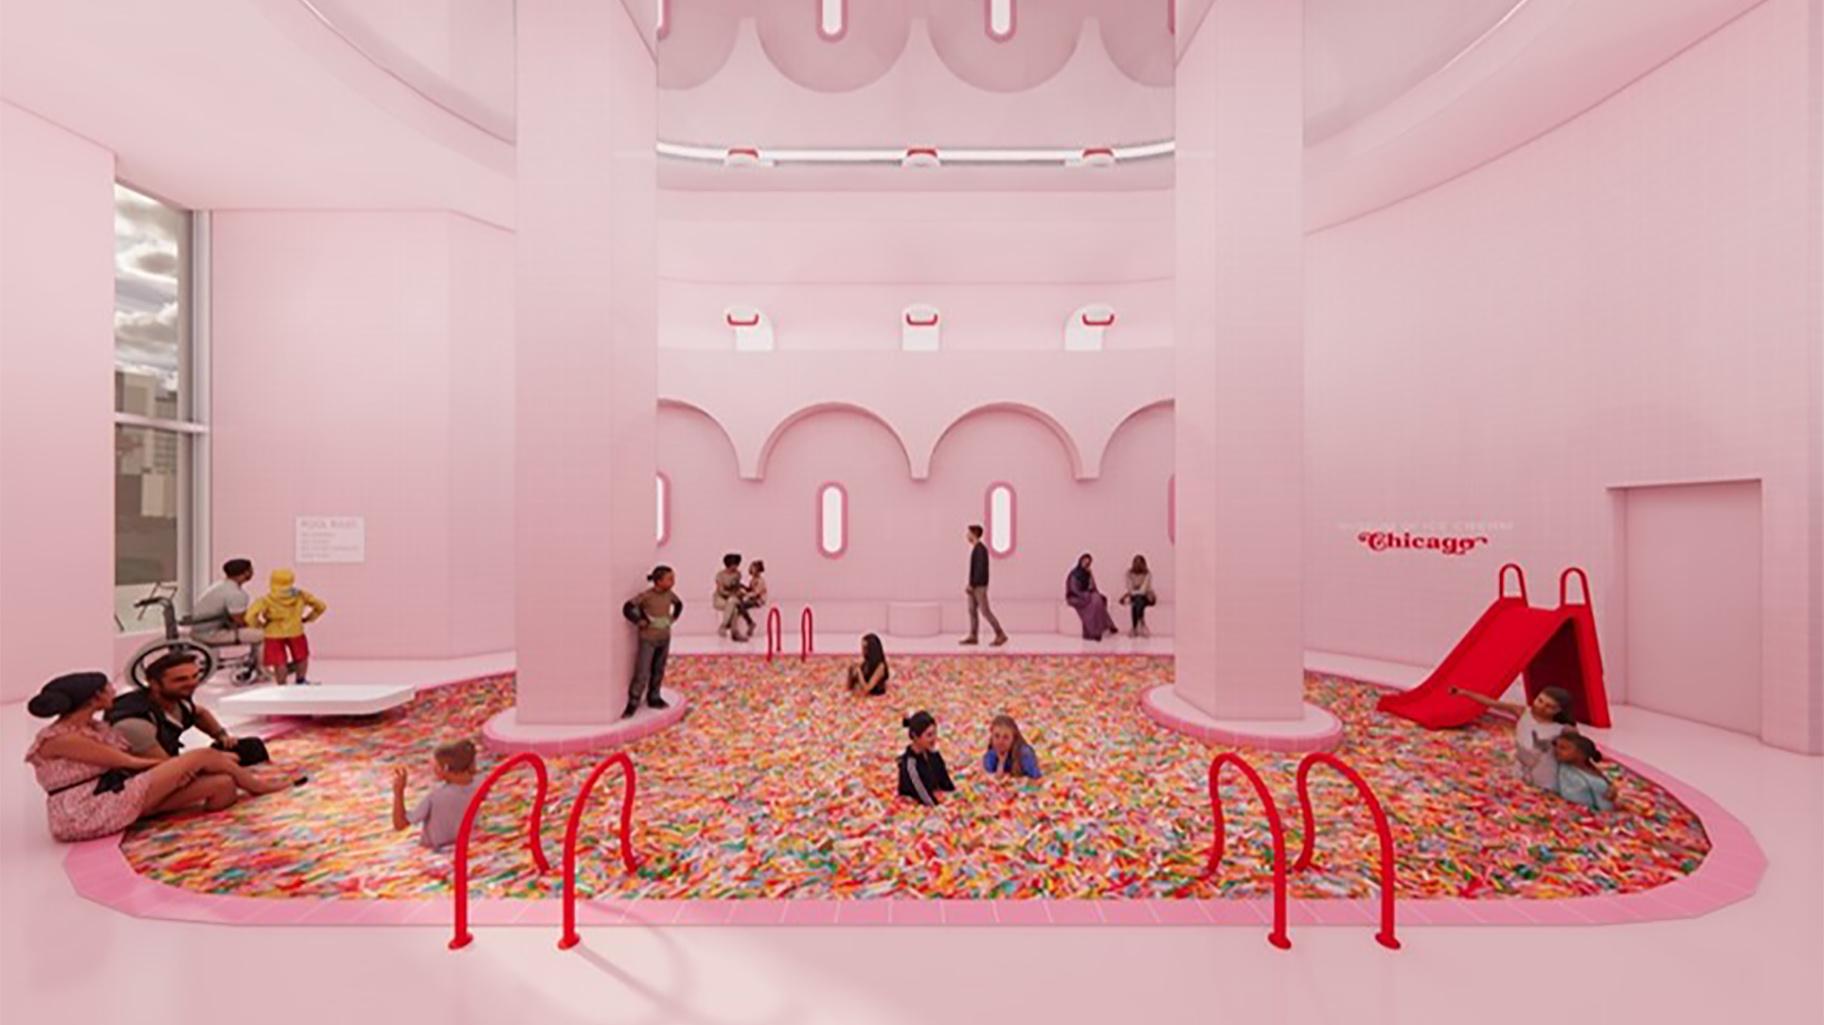 The Chicago location of The Museum of Ice Cream will also feature fan favorites, like the famous Sprinkle Pool. (Courtesy Museum of Ice Cream)